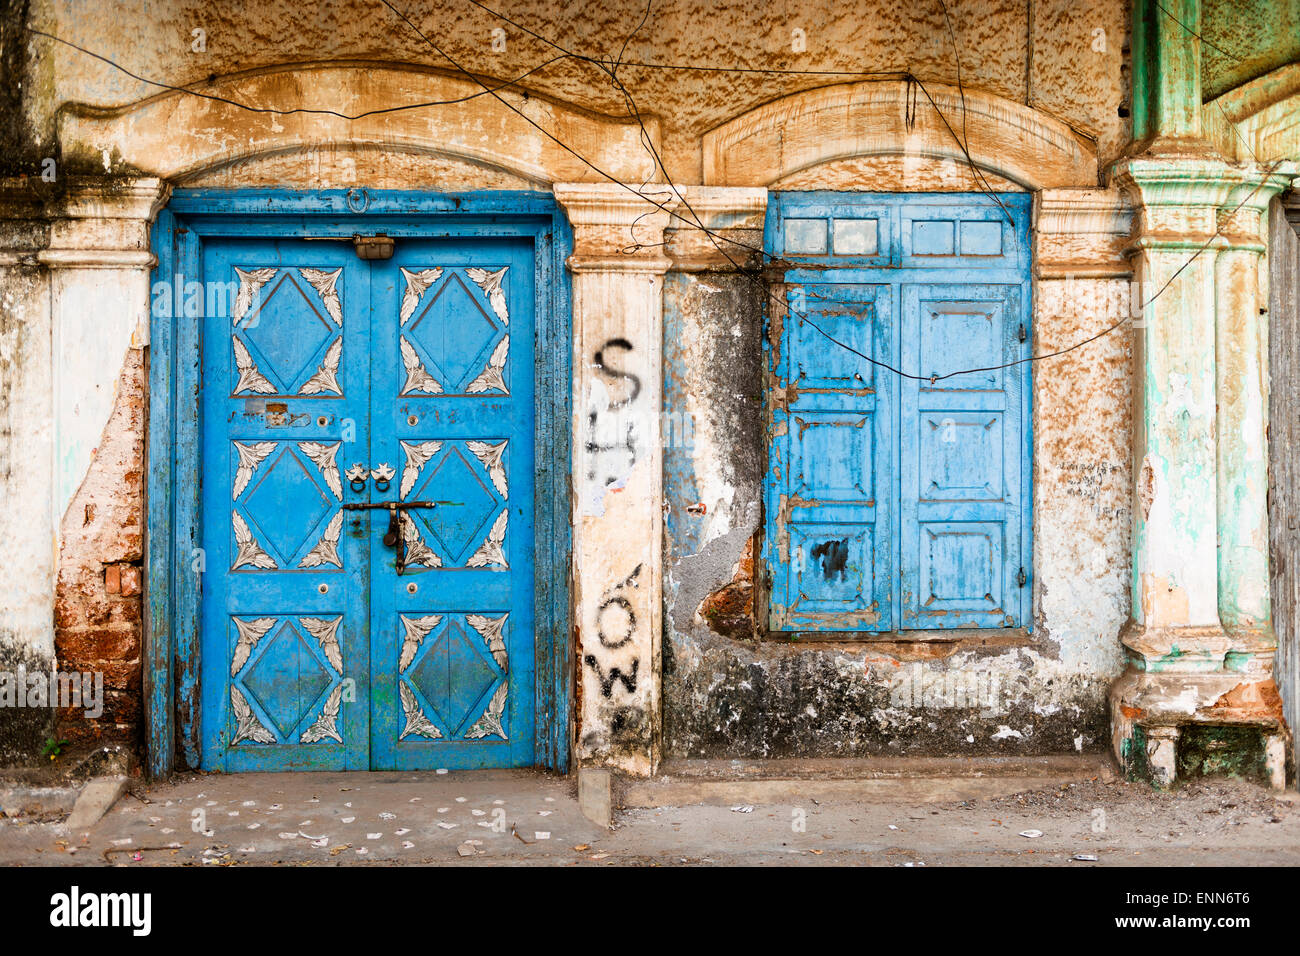 An old ornate blue door and window in the colonial Old Town of Fort Kochi. Stock Photo